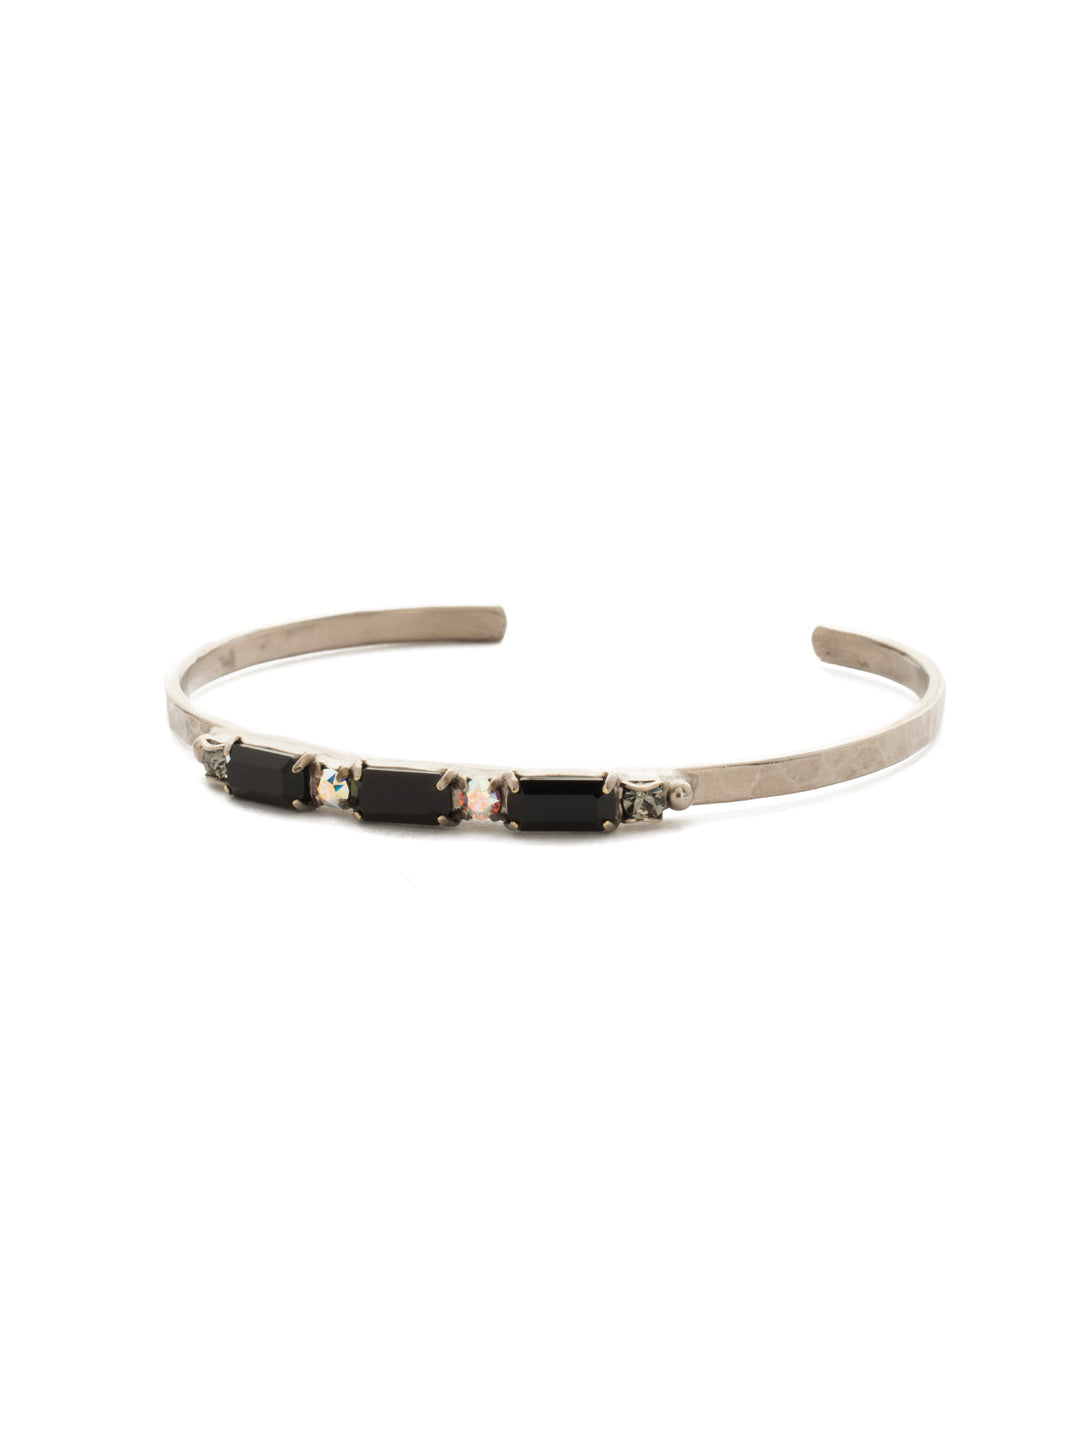 Line and Dot Cuff Bracelet - BDK50ASBLT - <p>A thin, hammered oh-so-stackable cuff bracelet with an alternating pattern of round and baguette crystals. From Sorrelli's Black Tie collection in our Antique Silver-tone finish.</p>